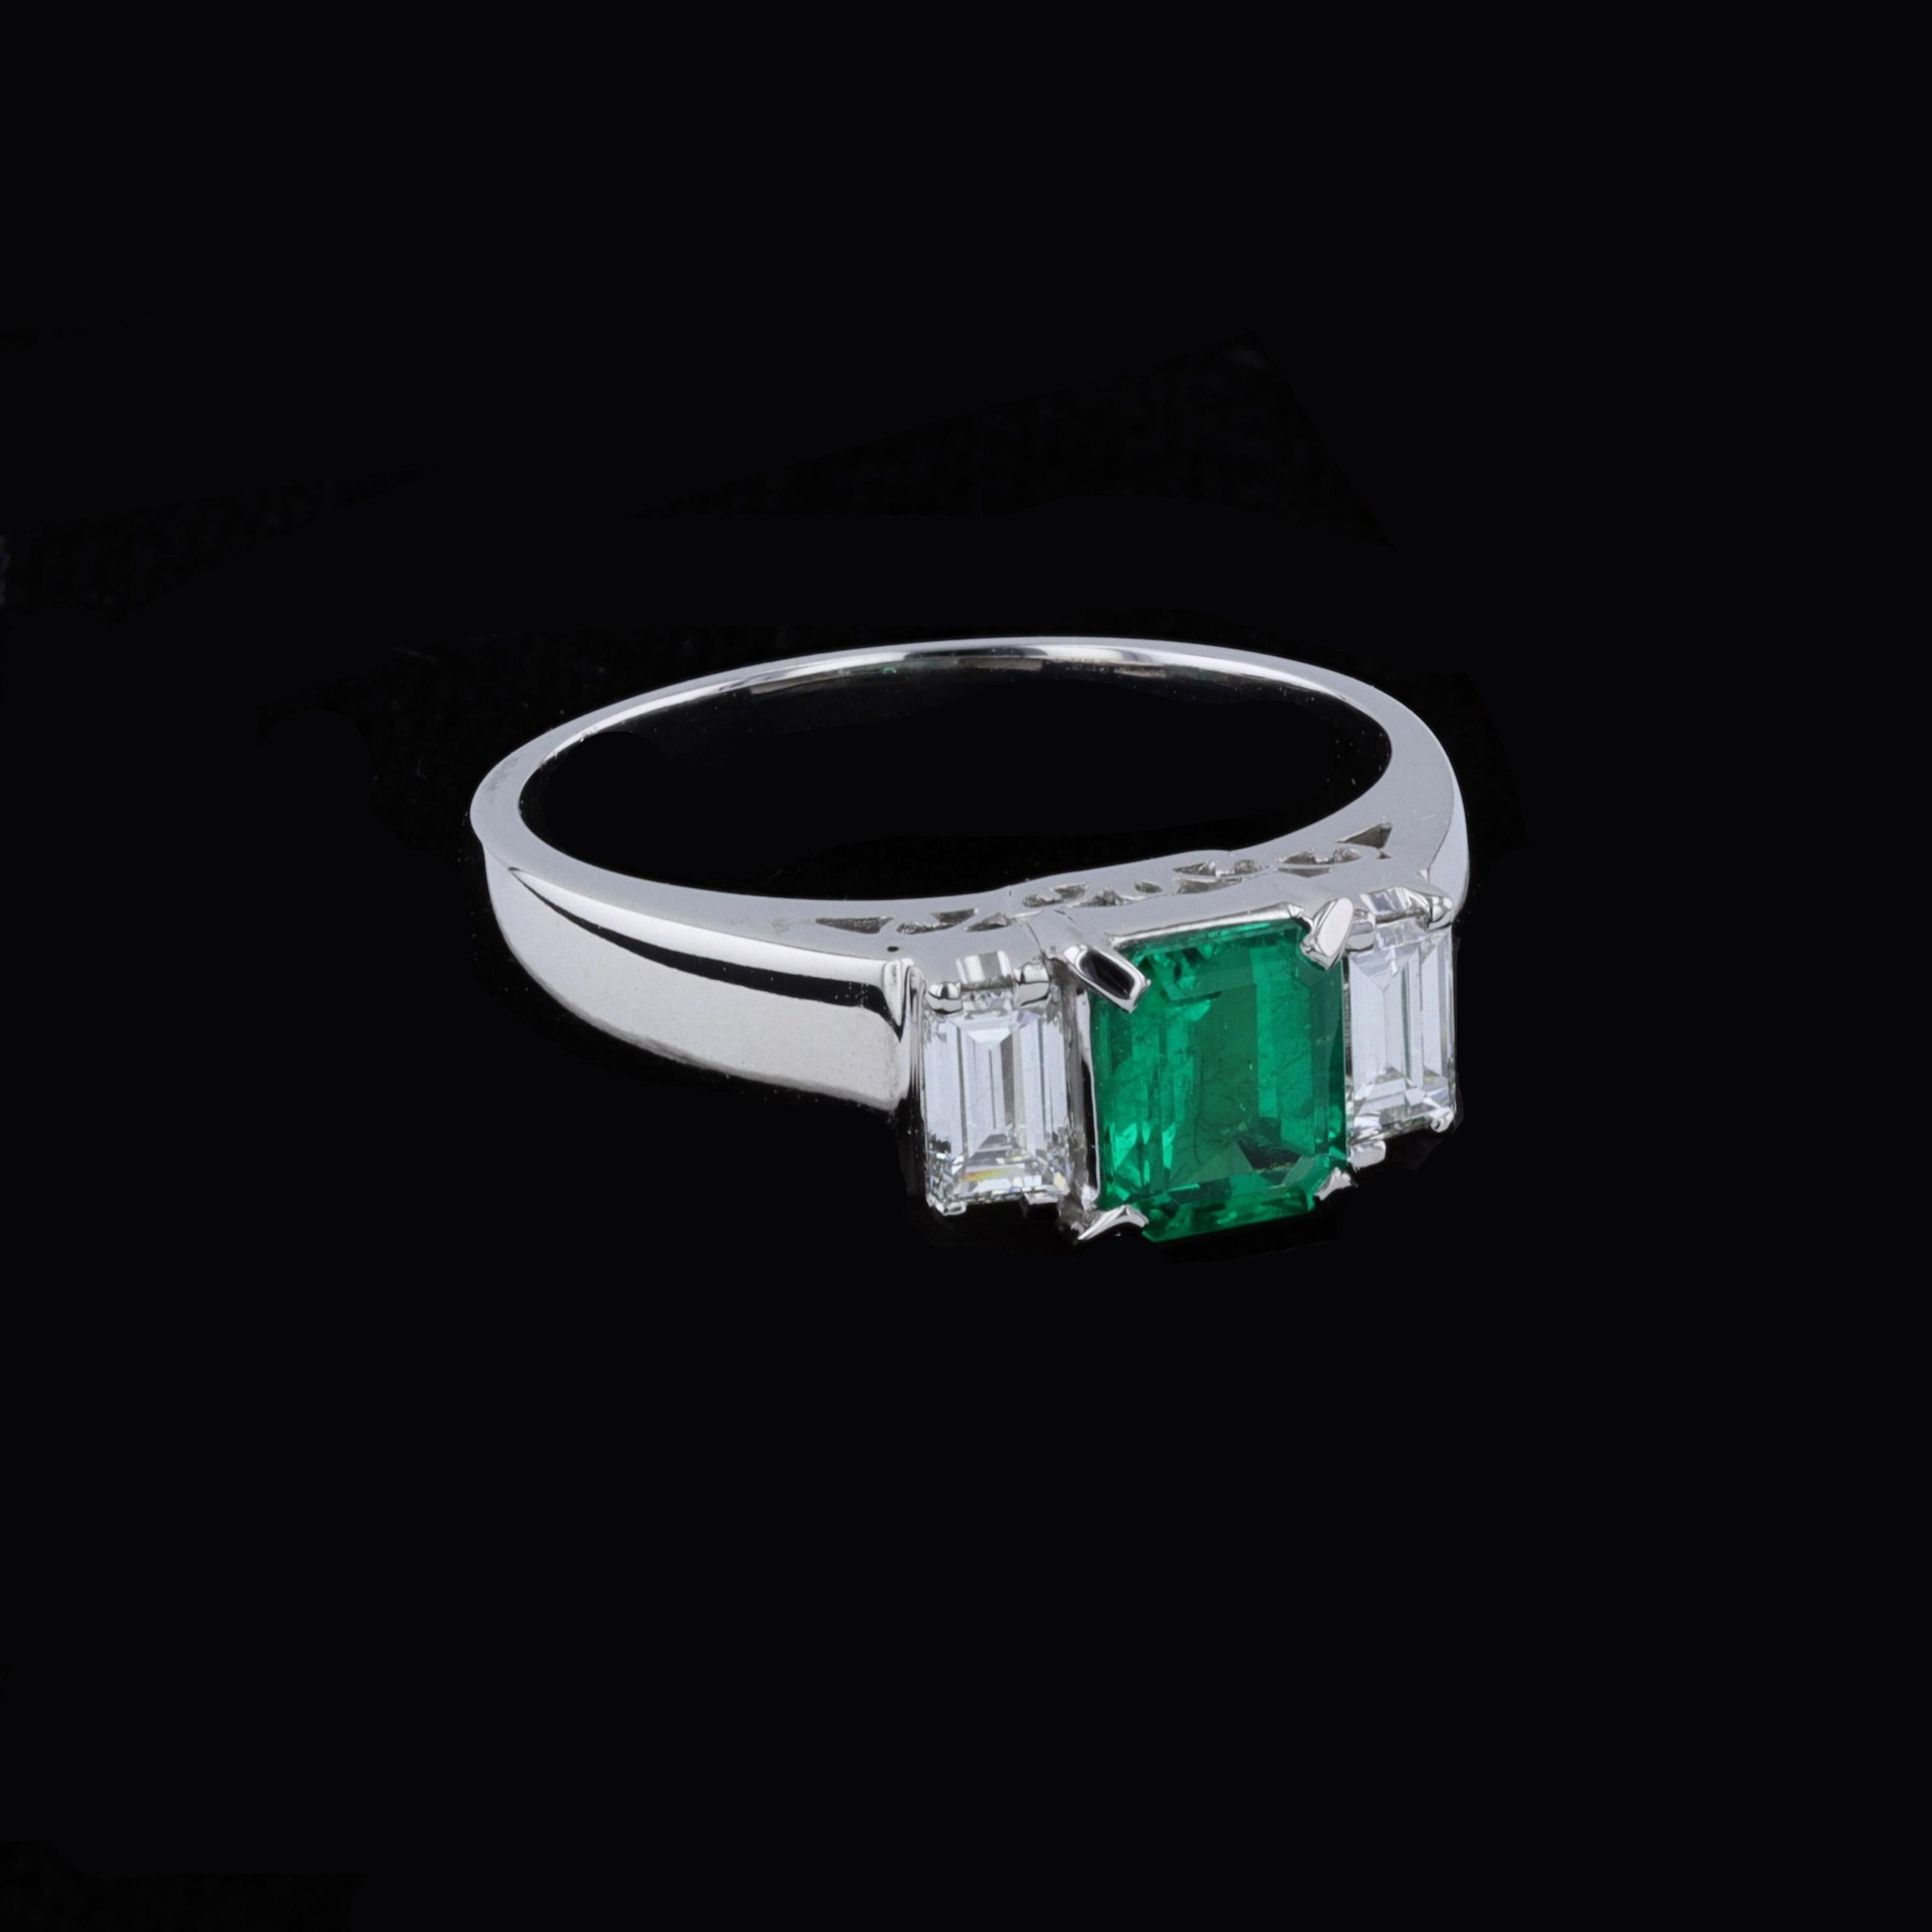 0.68ct Emerald 0.40ct Diamond Platinum Ring. The ring is centered with emerald cut emerald that weighs approximately 0.68ct. The center stone is accentuated by 2 emerald cut diamonds that weigh approximately 0.40ct. The color of the diamonds is G